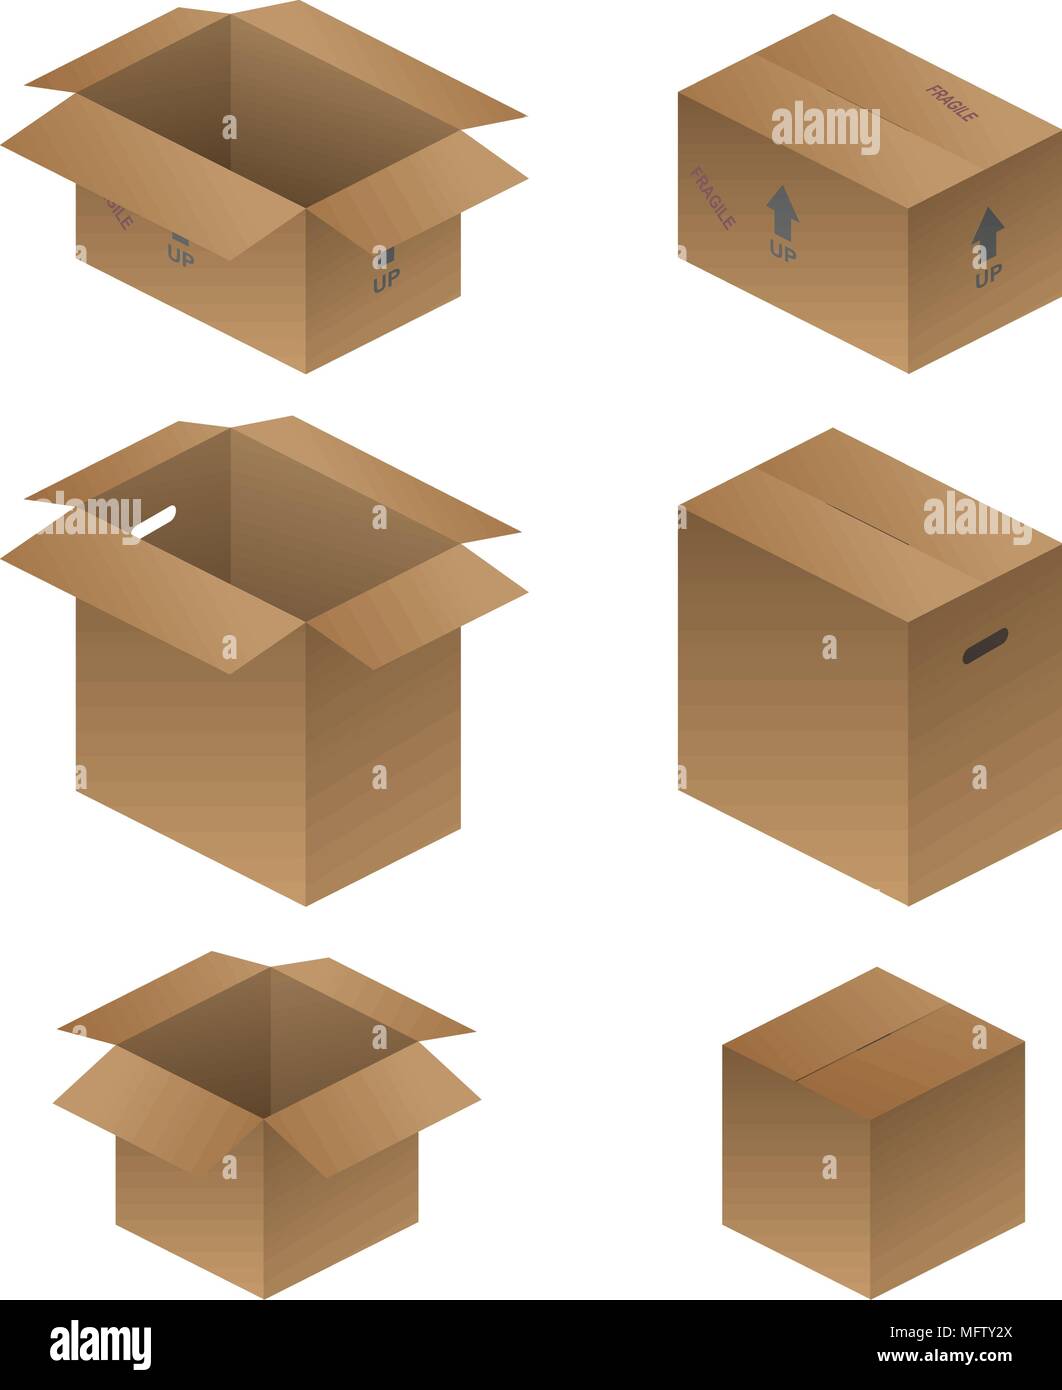 Various Shipping, Packing, and Moving Boxes Vector Illustration Stock Vector